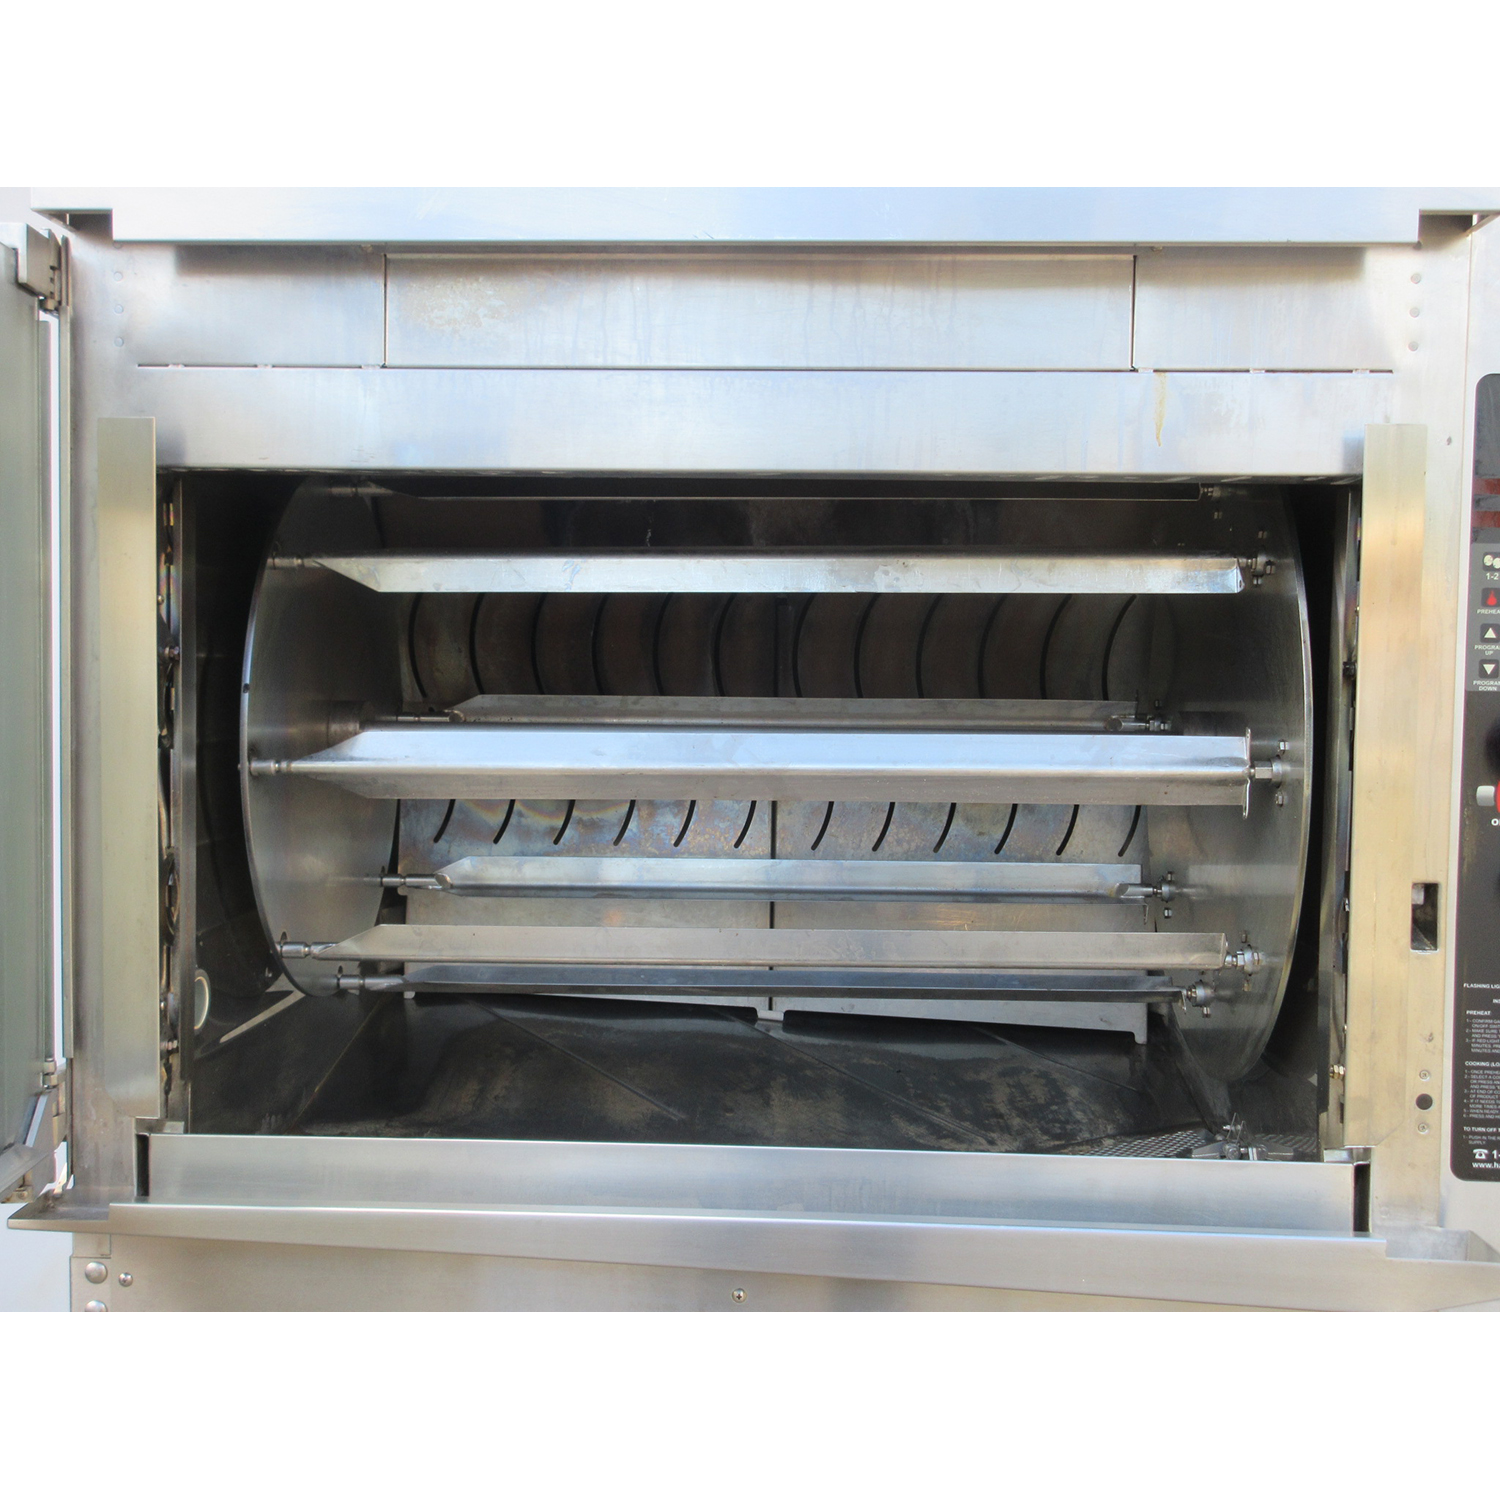 Hardt INFERNO-4500 Rotisserie Oven, Gas, Used Excellent Condition image 2